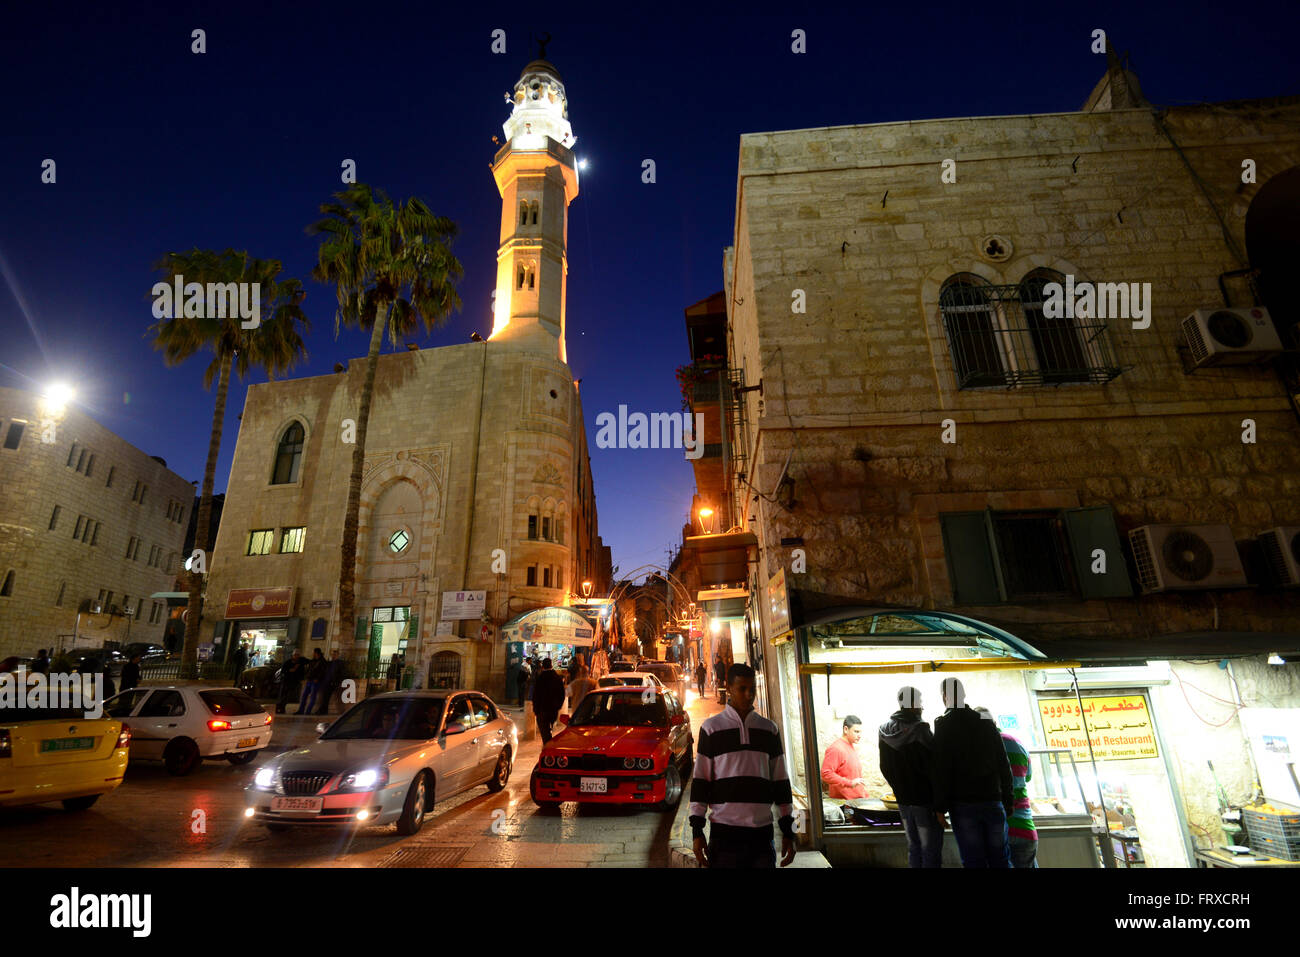 grand Mosque at Manger place in Bethlehem at night, Palestine near Israel Stock Photo